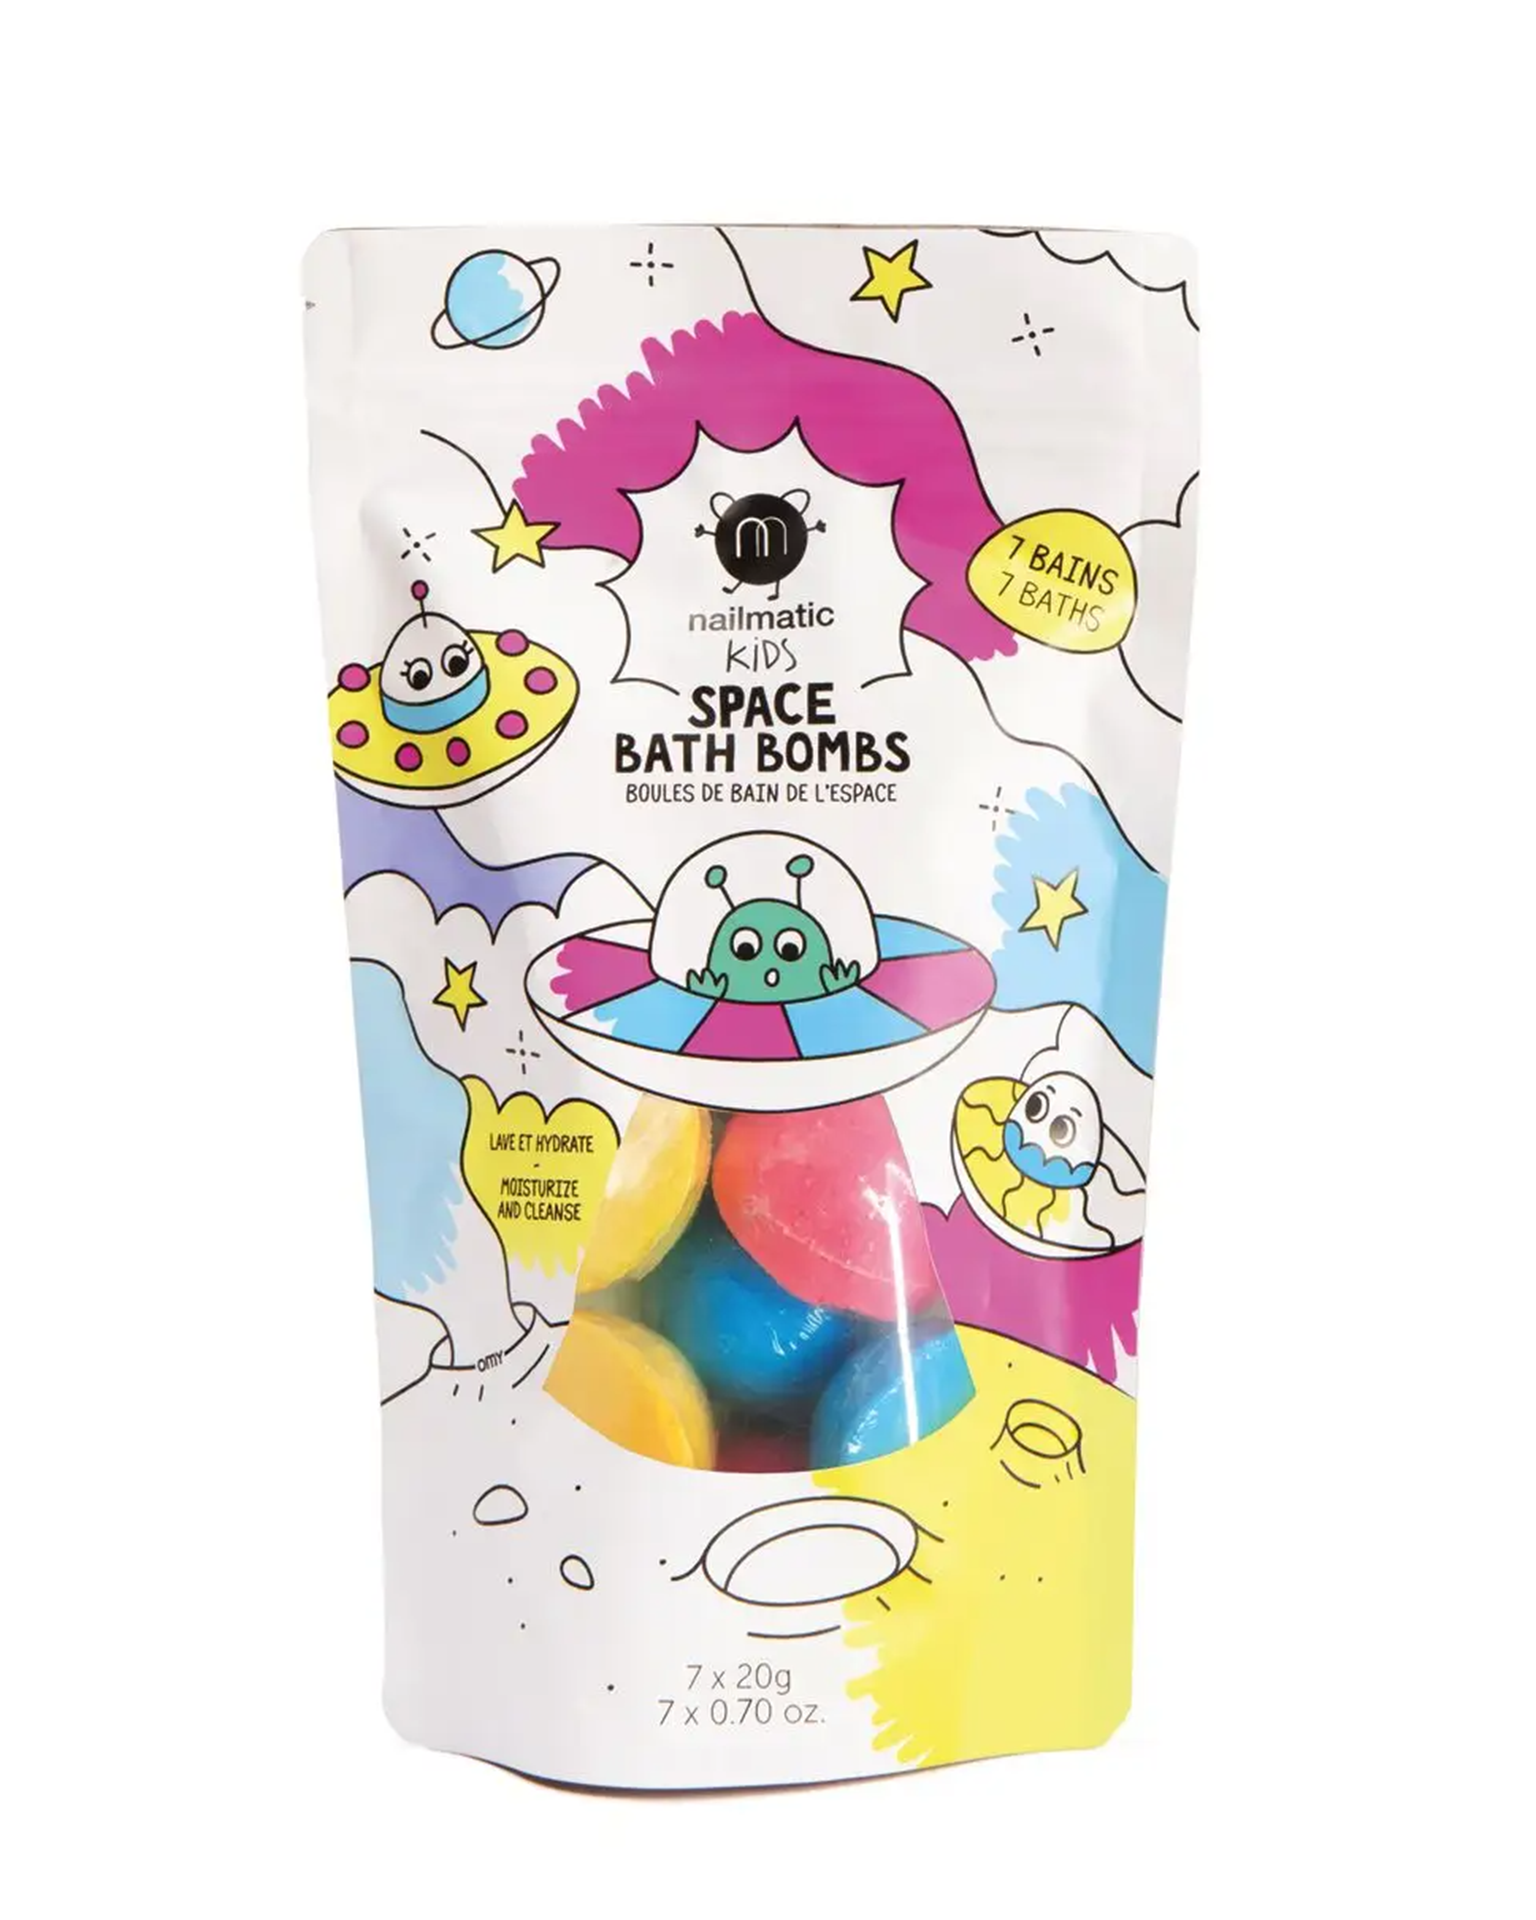 Little nailmatic play space bath bombs